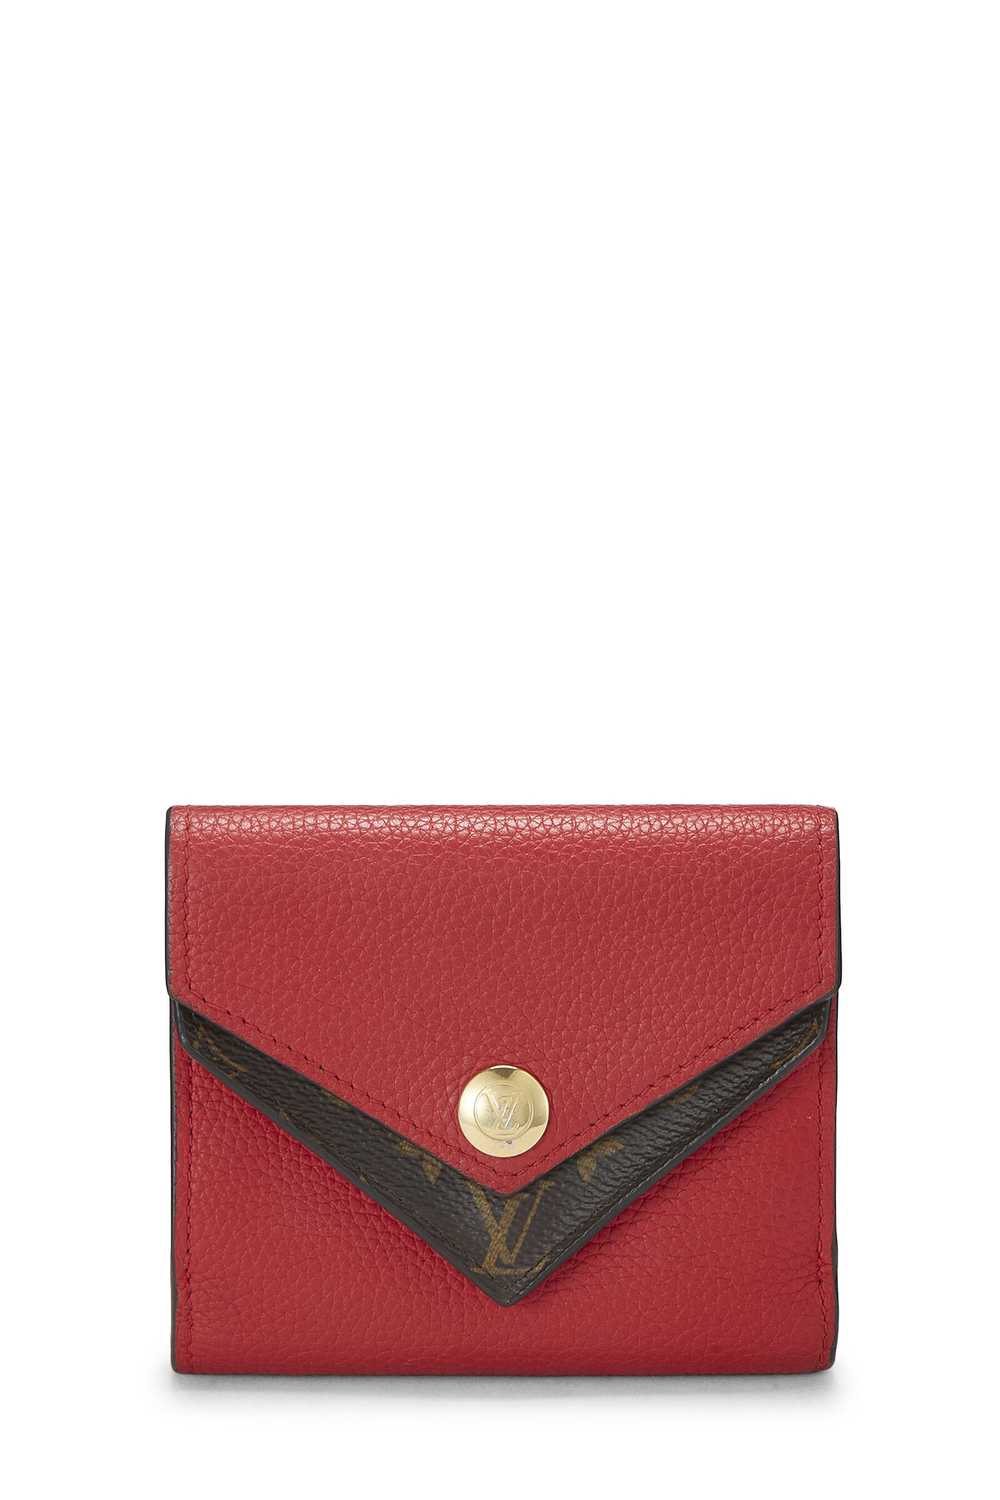 Red Monogram Double V Compact Wallet - image 1